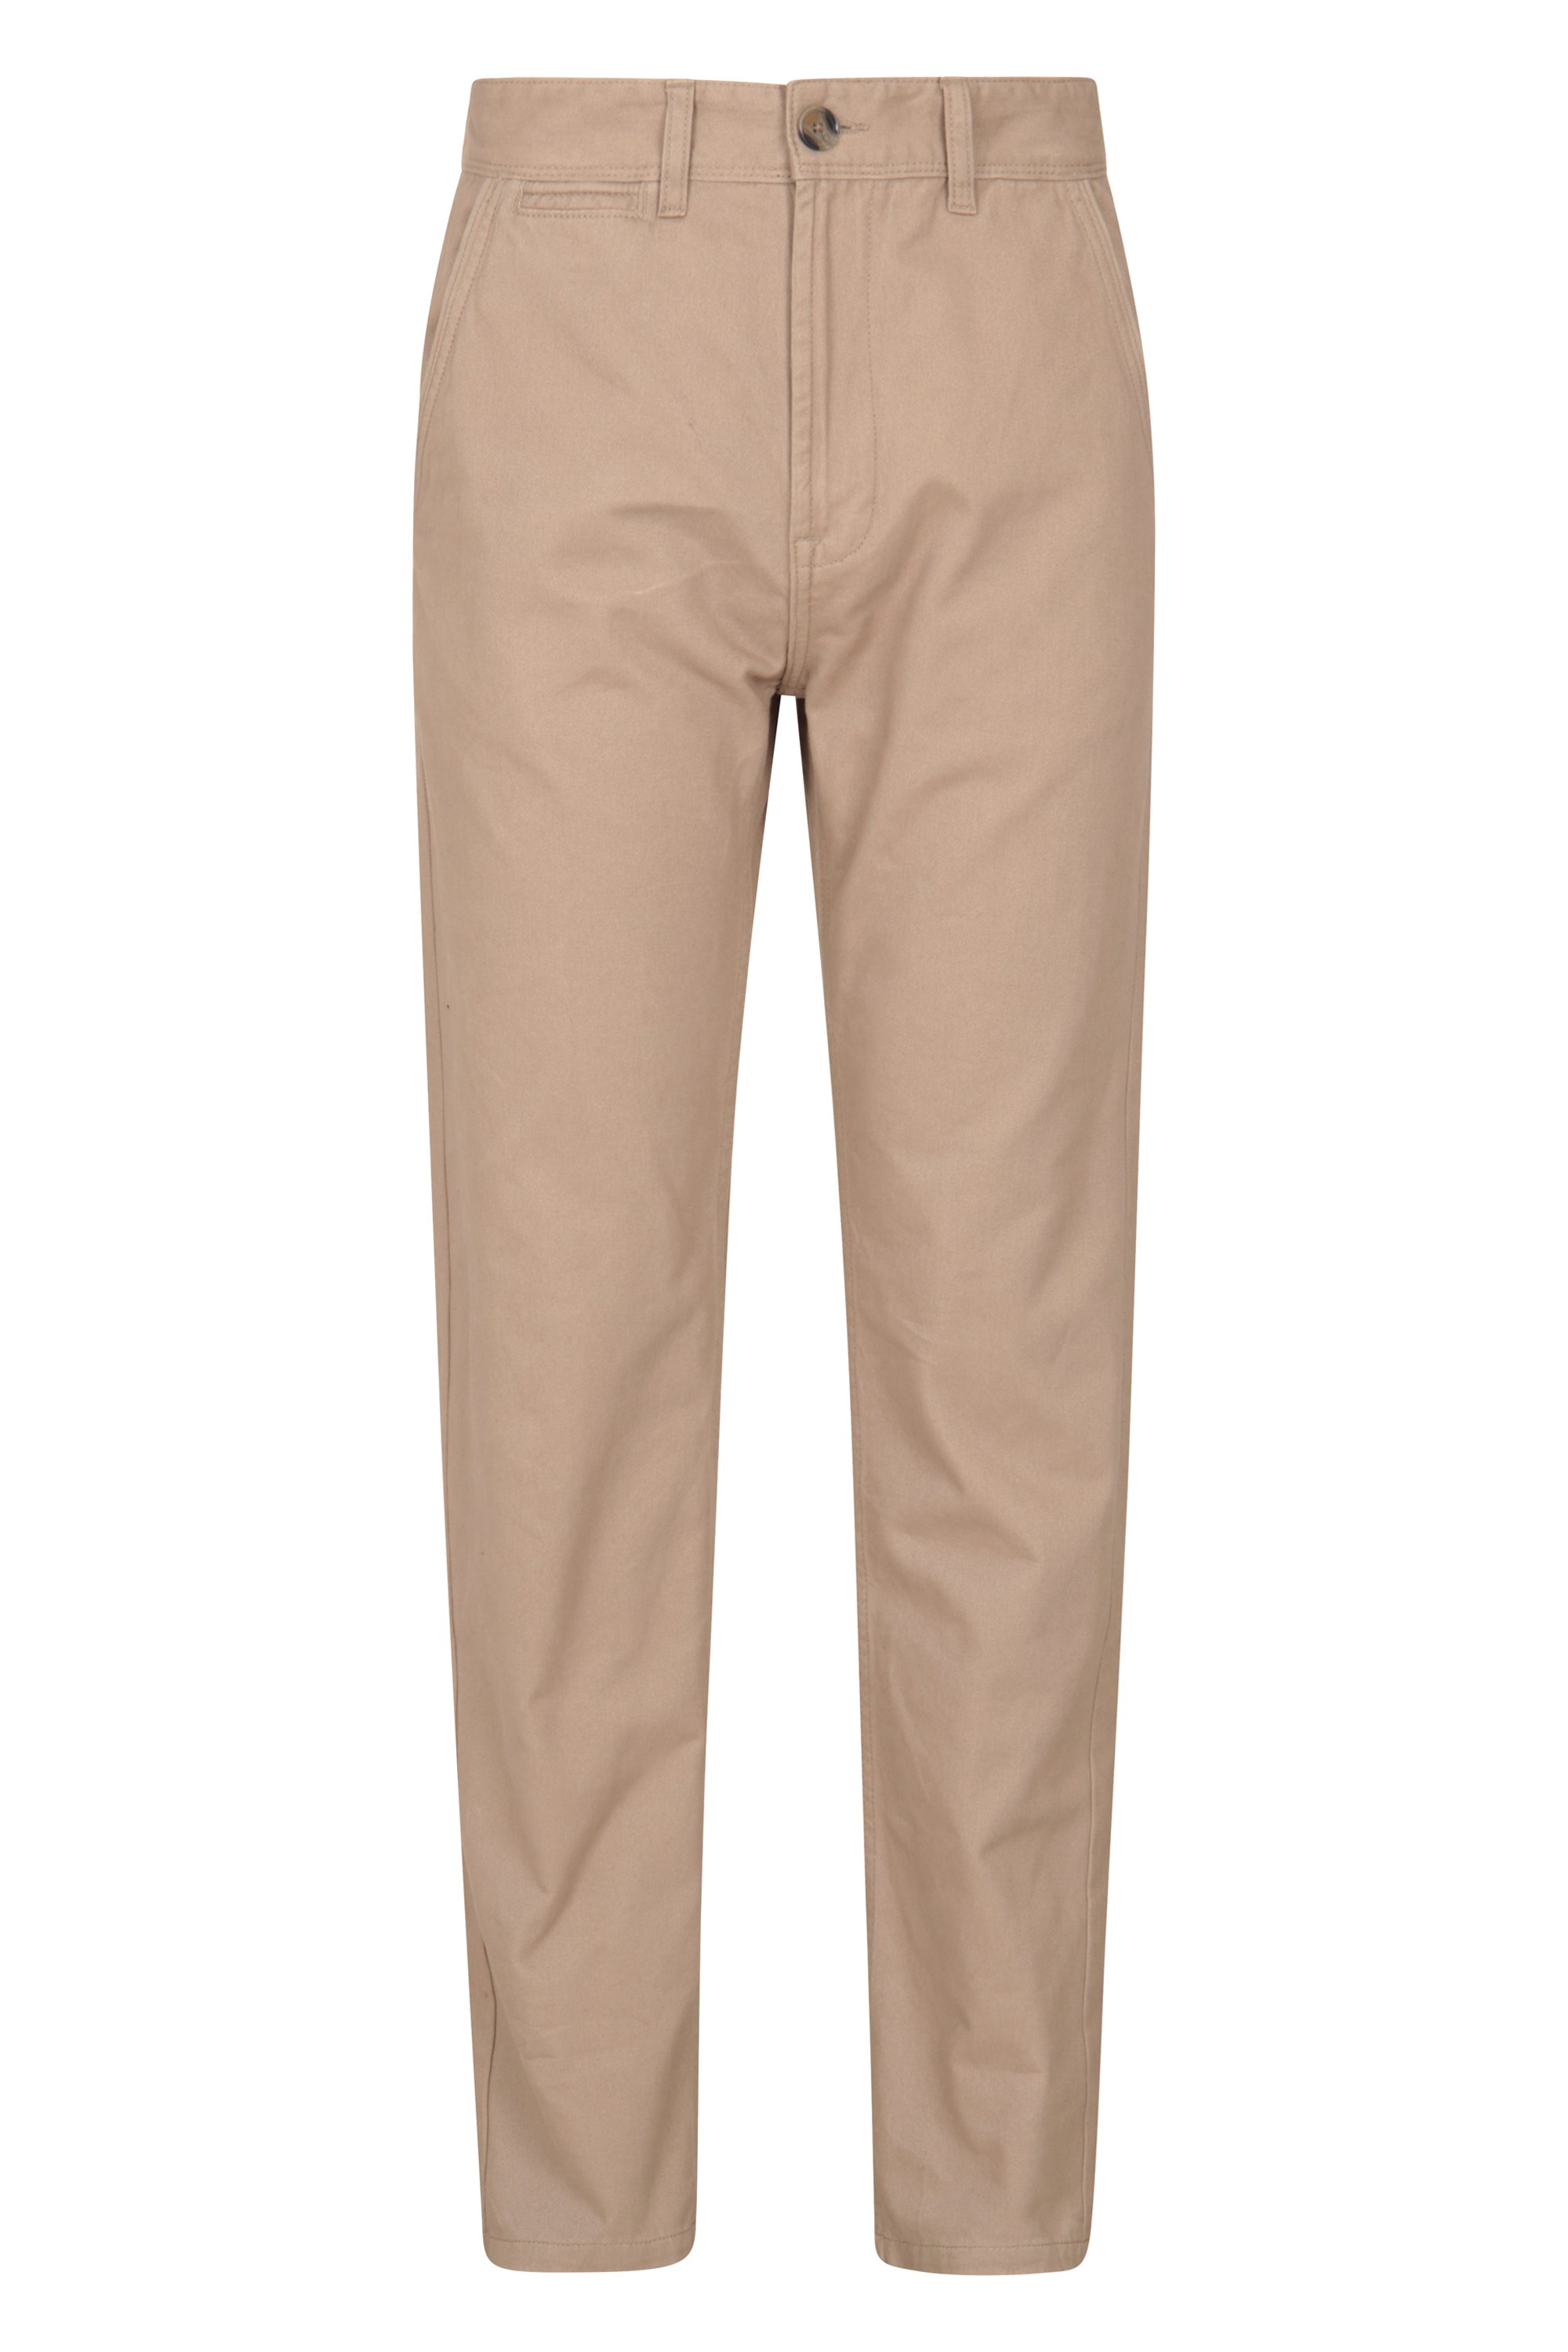 Chino Mens Trousers - Beige